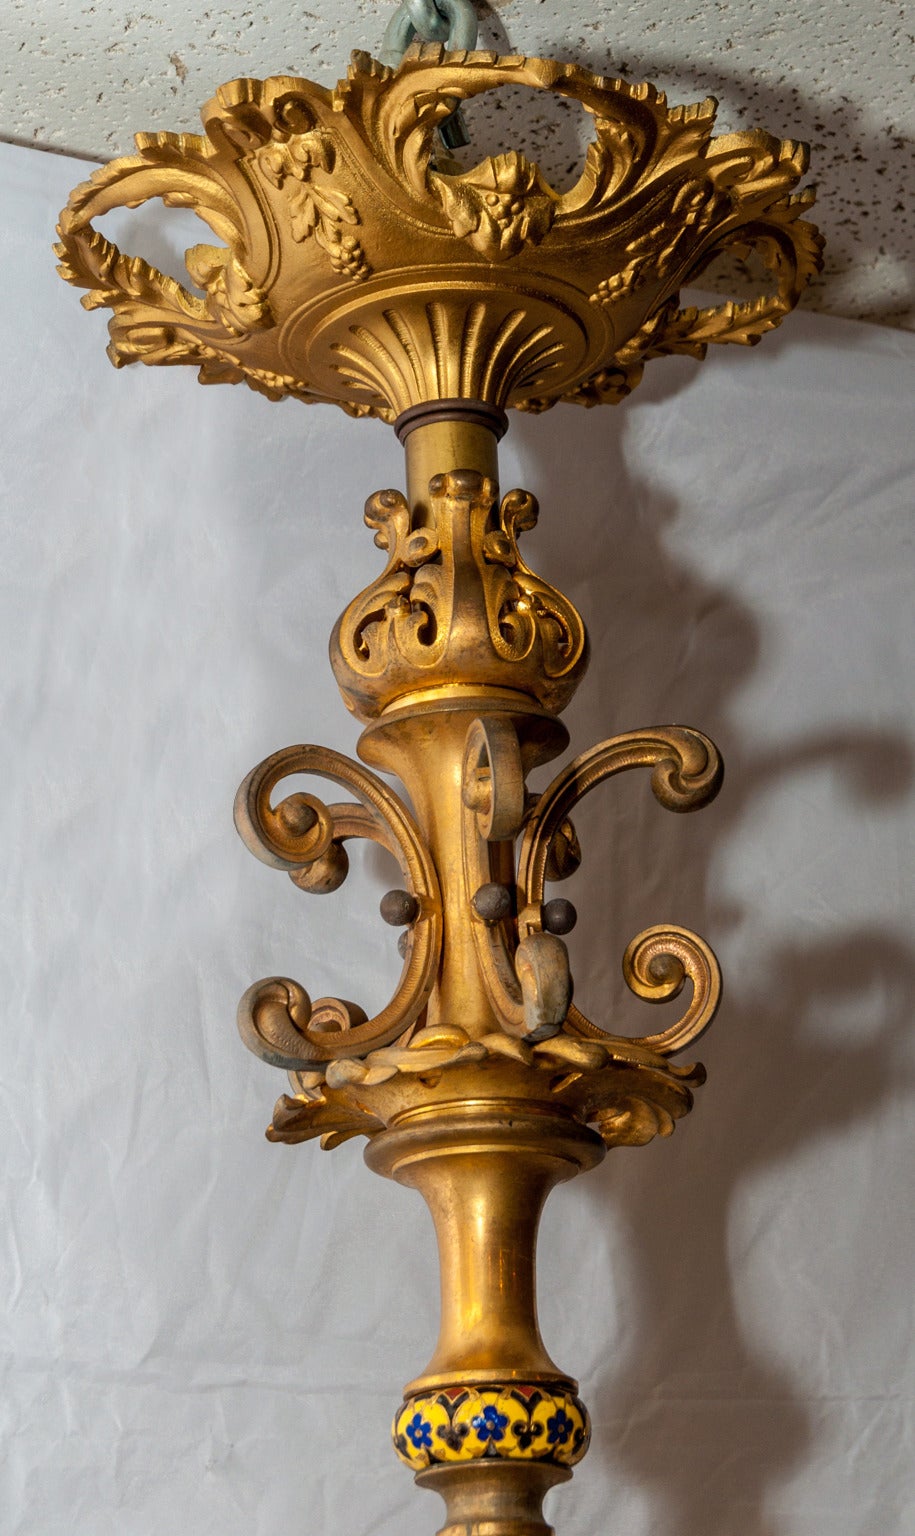 19th Century French Champleve Enamel and Bronze Nine-Light Chandelier For Sale 2